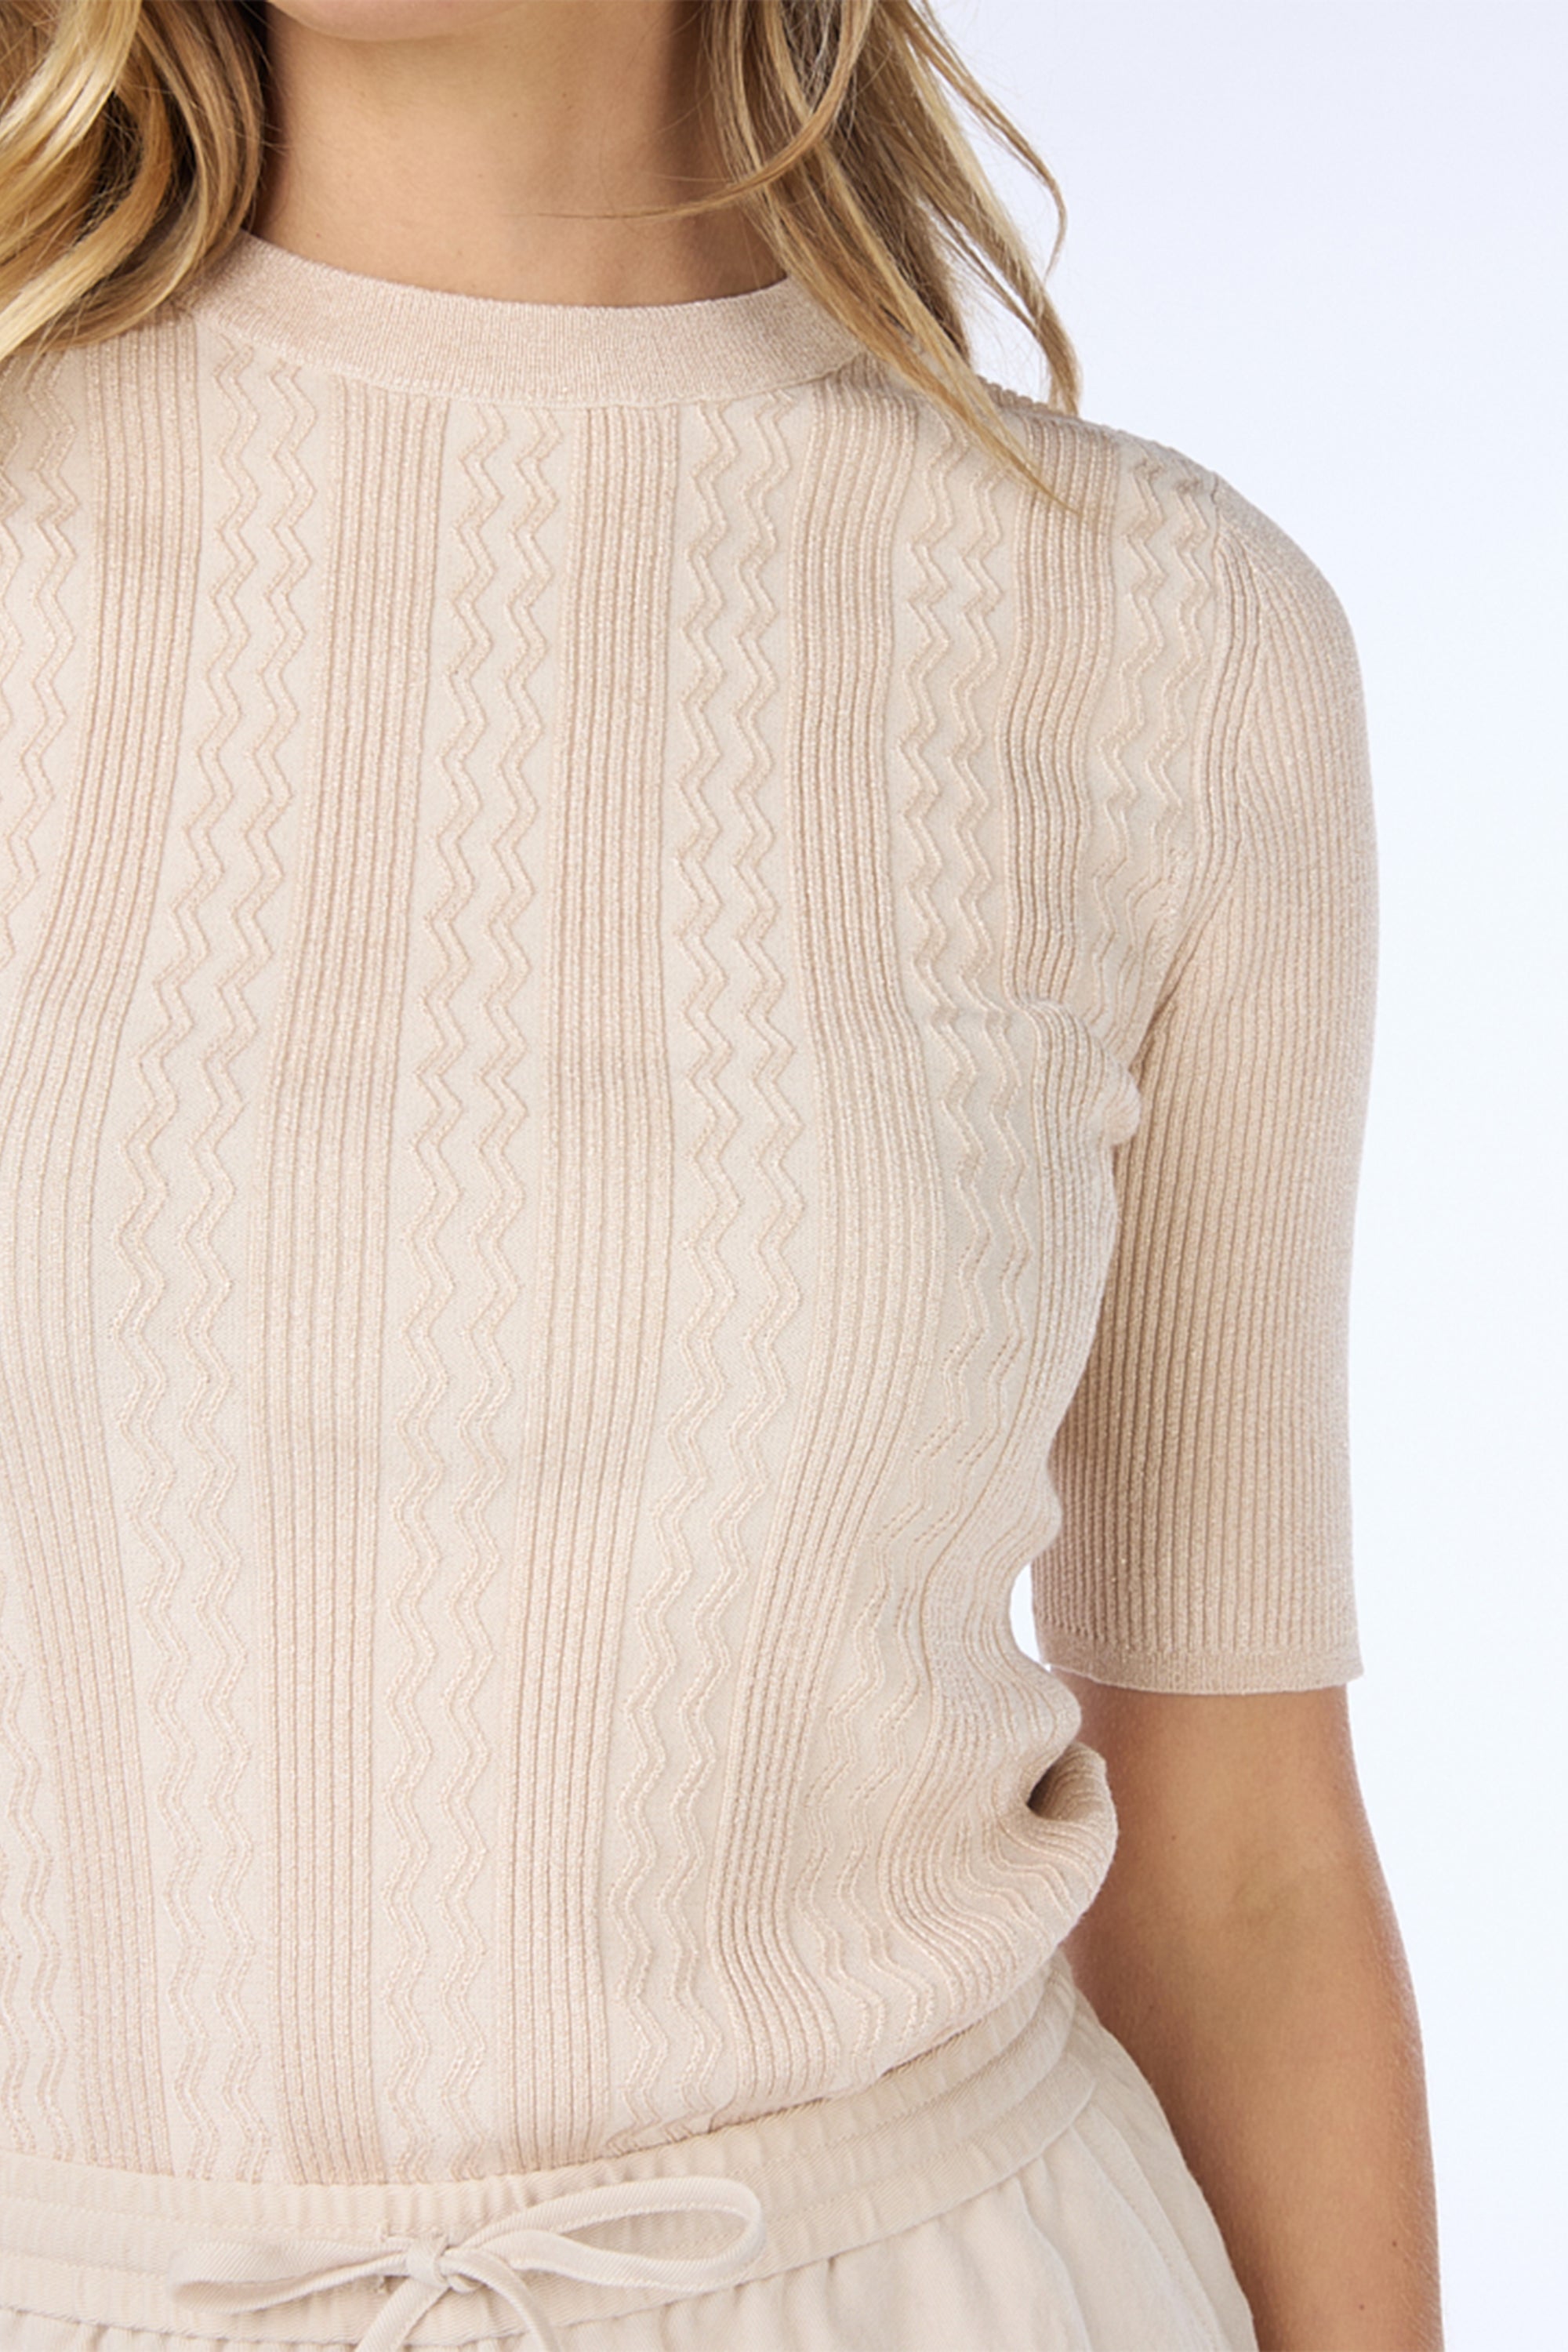 Front close up Esqualo (SP2431001) Women's Short Sleeve Fitted Cream Sweater with Golden Lurex and Striped Ribbed Knit